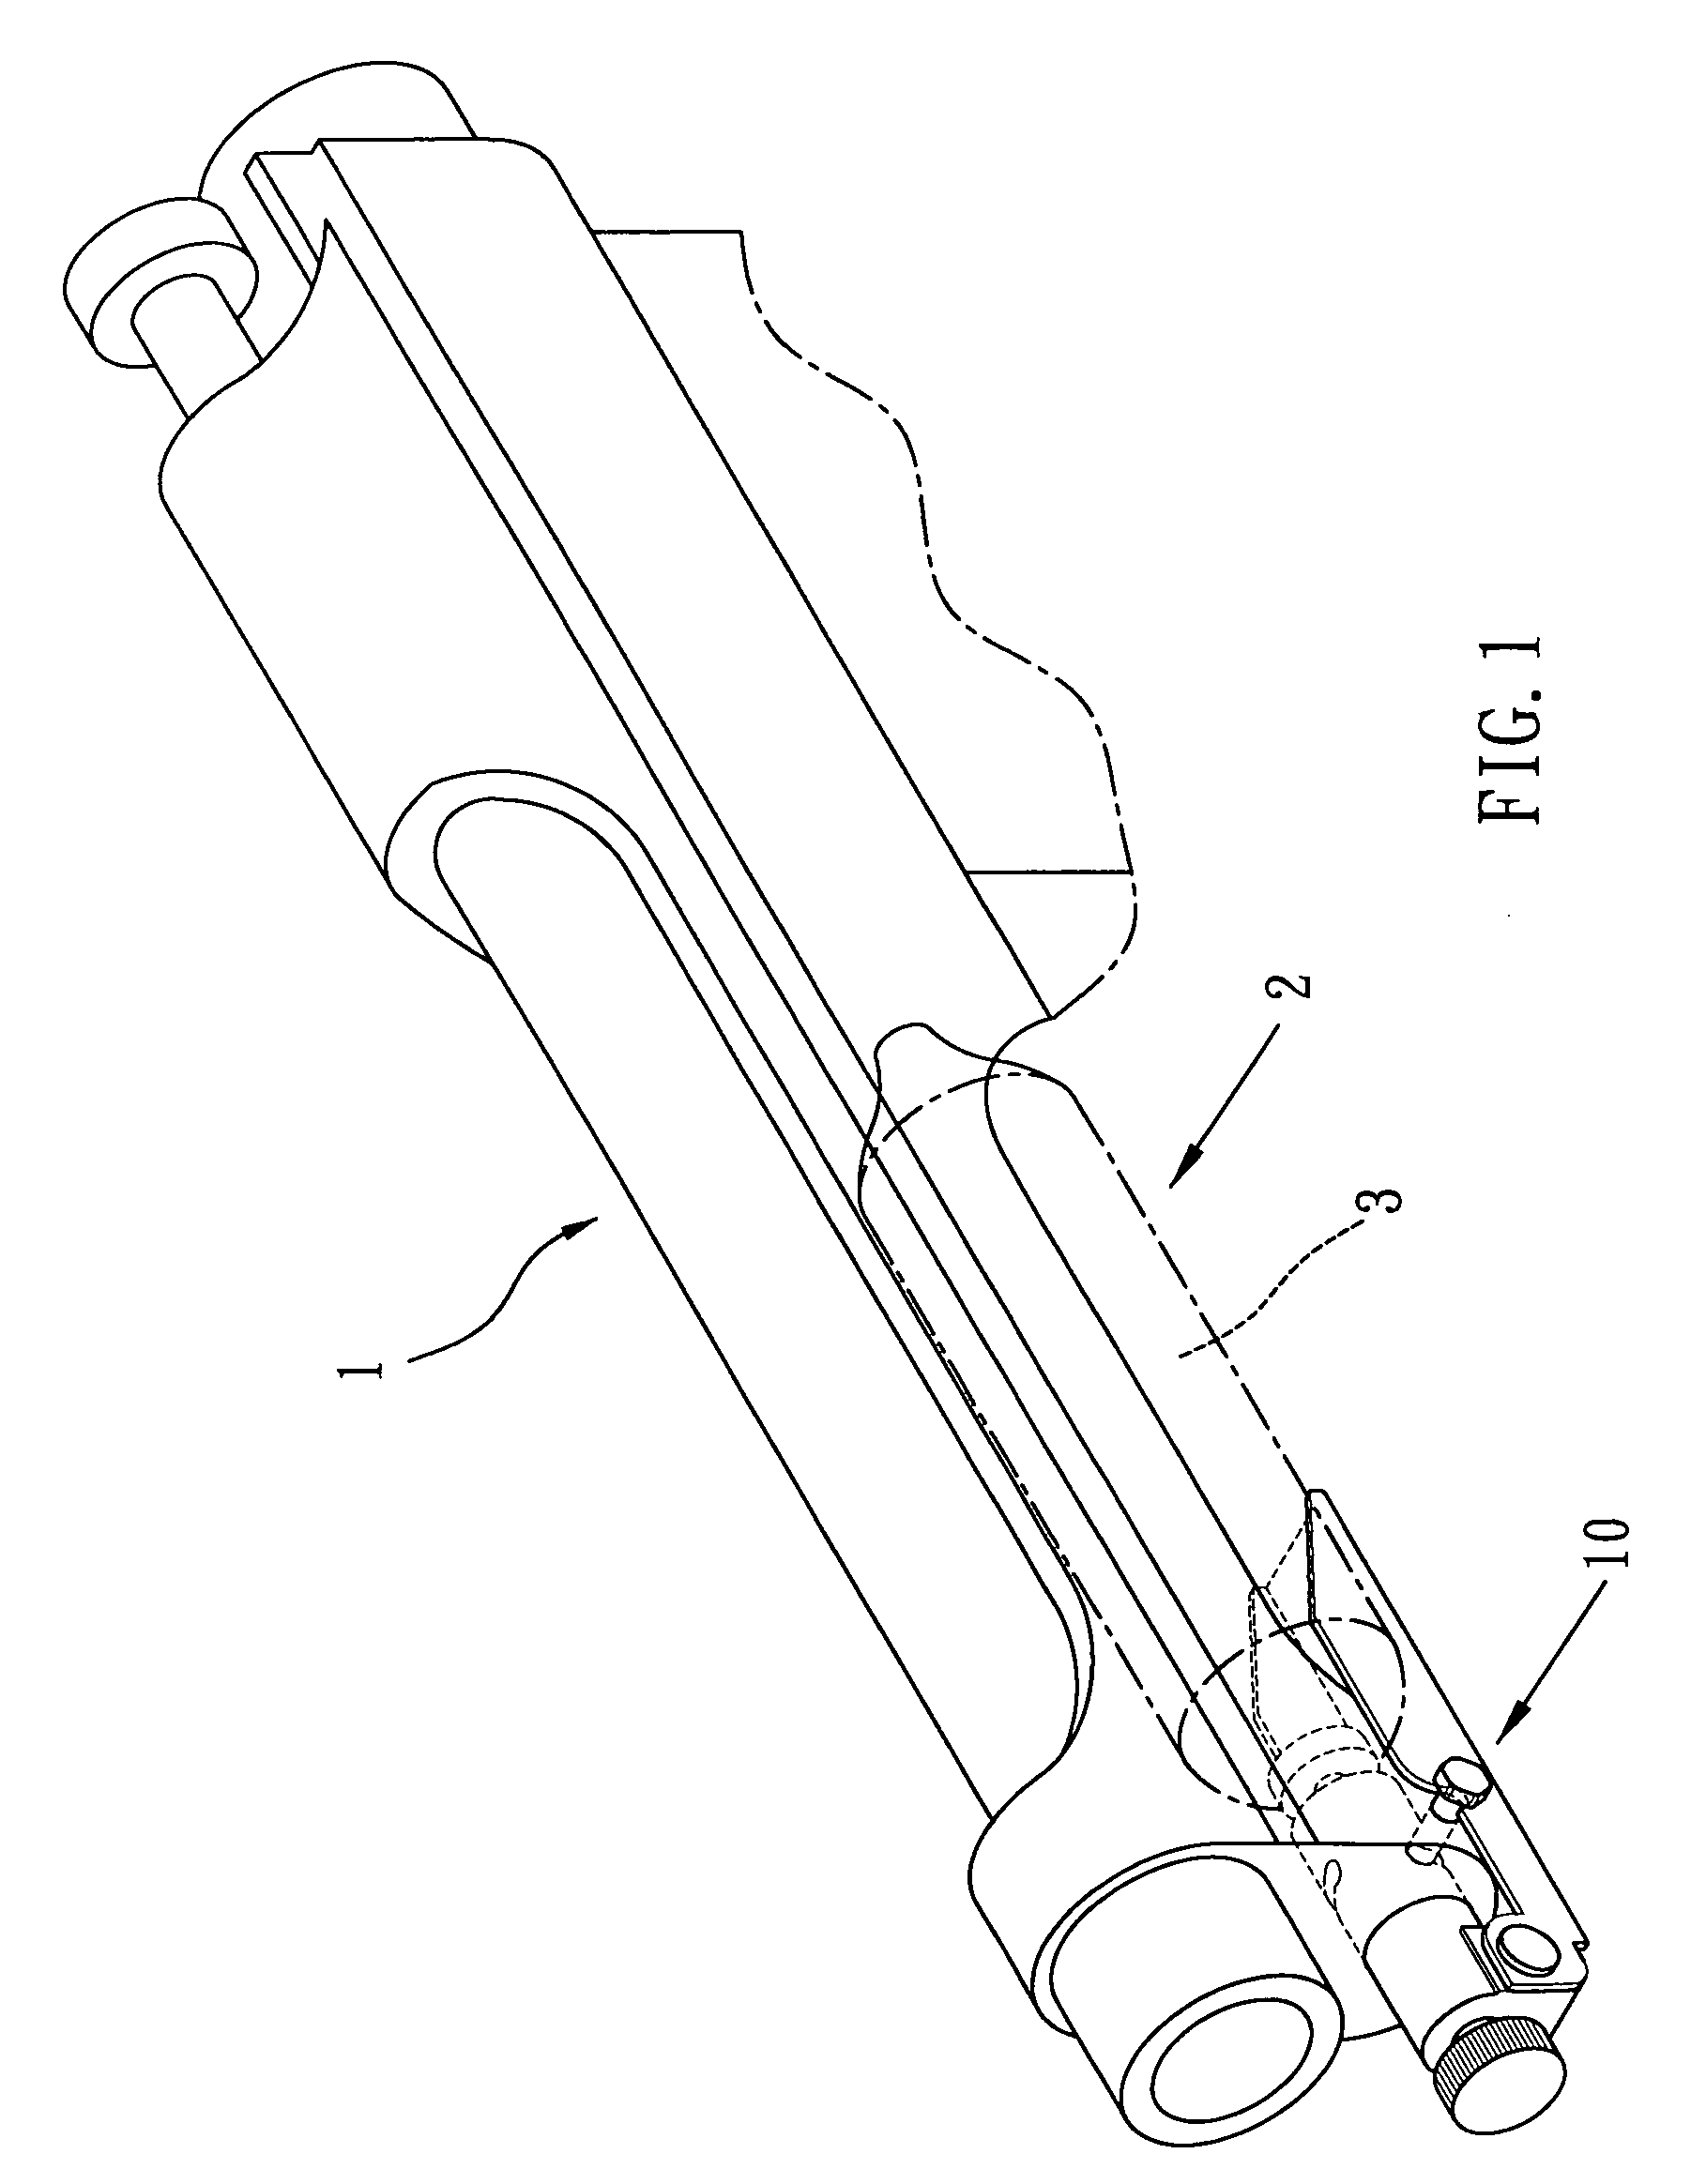 Air bottle securing device for paint ball gun